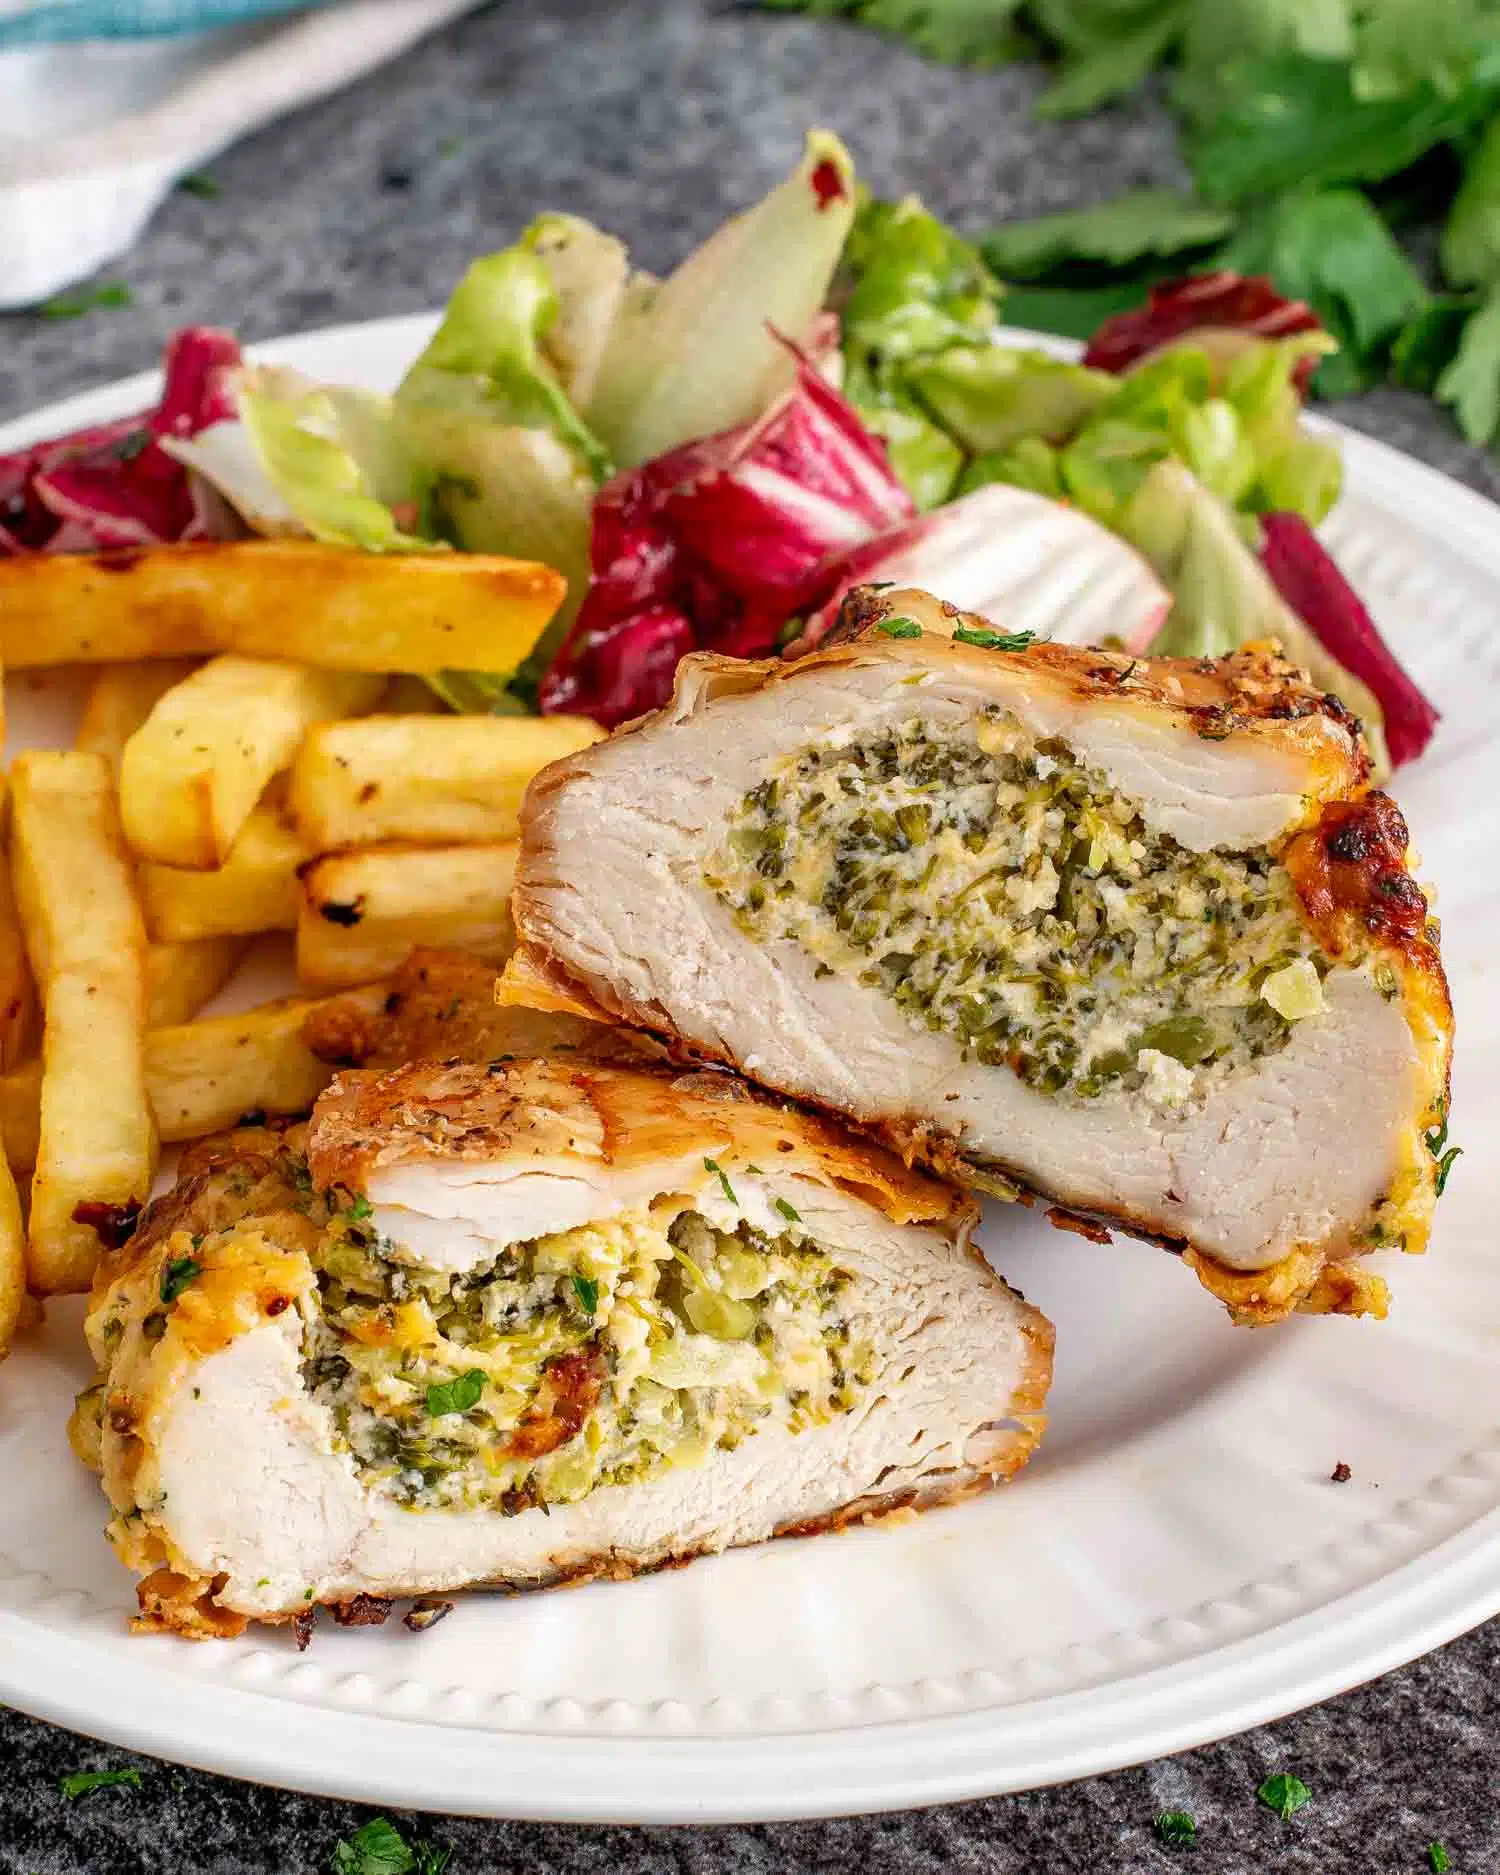 a broccoli cheese stuffed chicken breast cut in half on a plate with french fries and a salad.